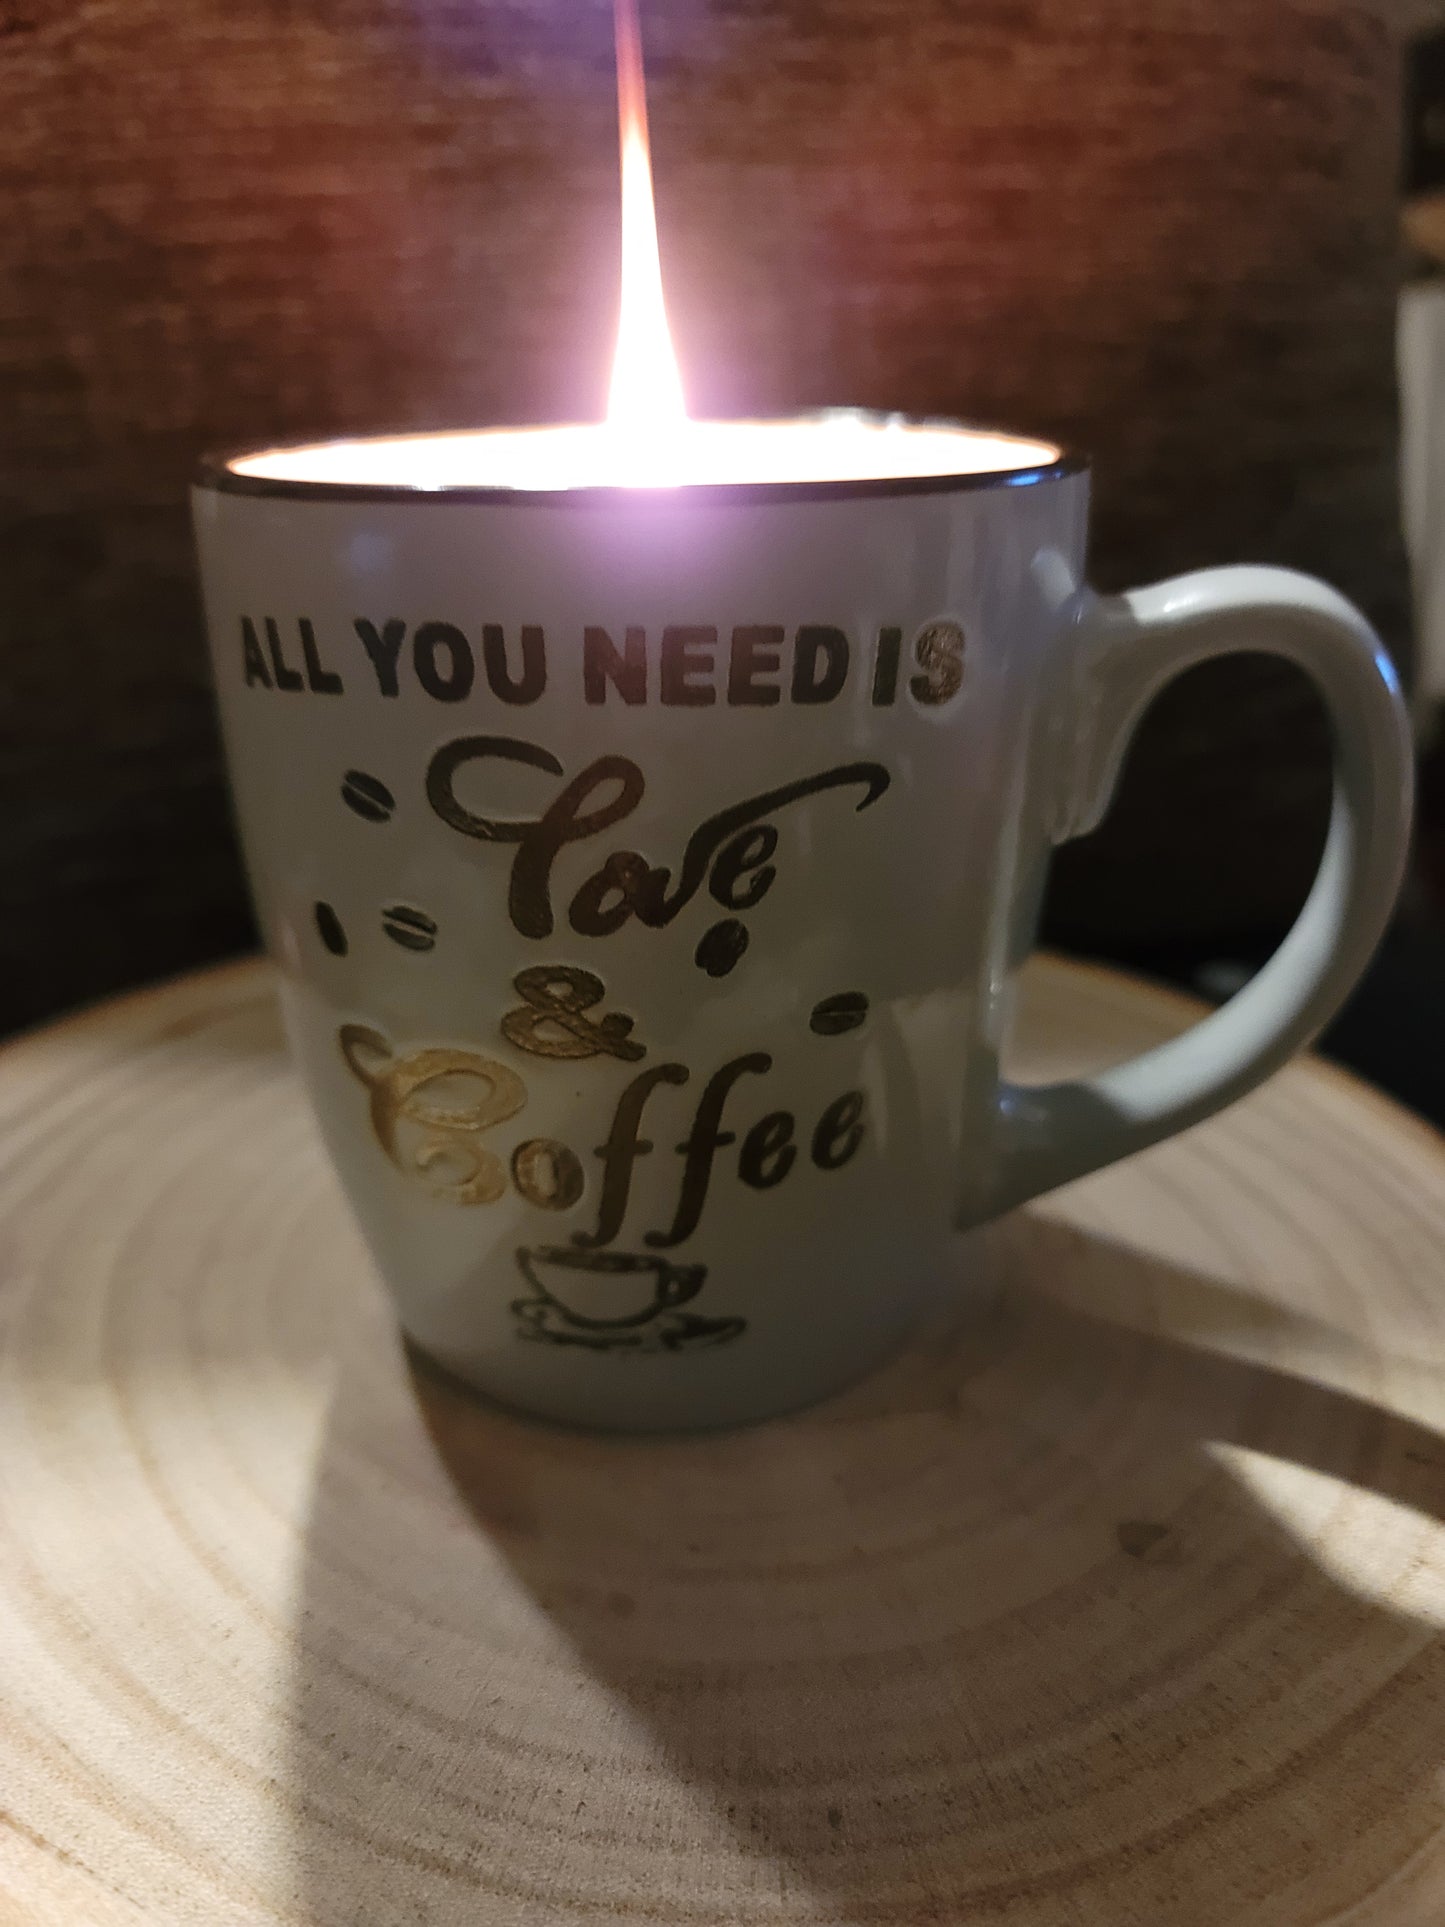 A hot cup of coffee, tea, chocolate in our scented candles, Burn the candle and keep the mug. Visit Now: www.lovedbymecreations.com